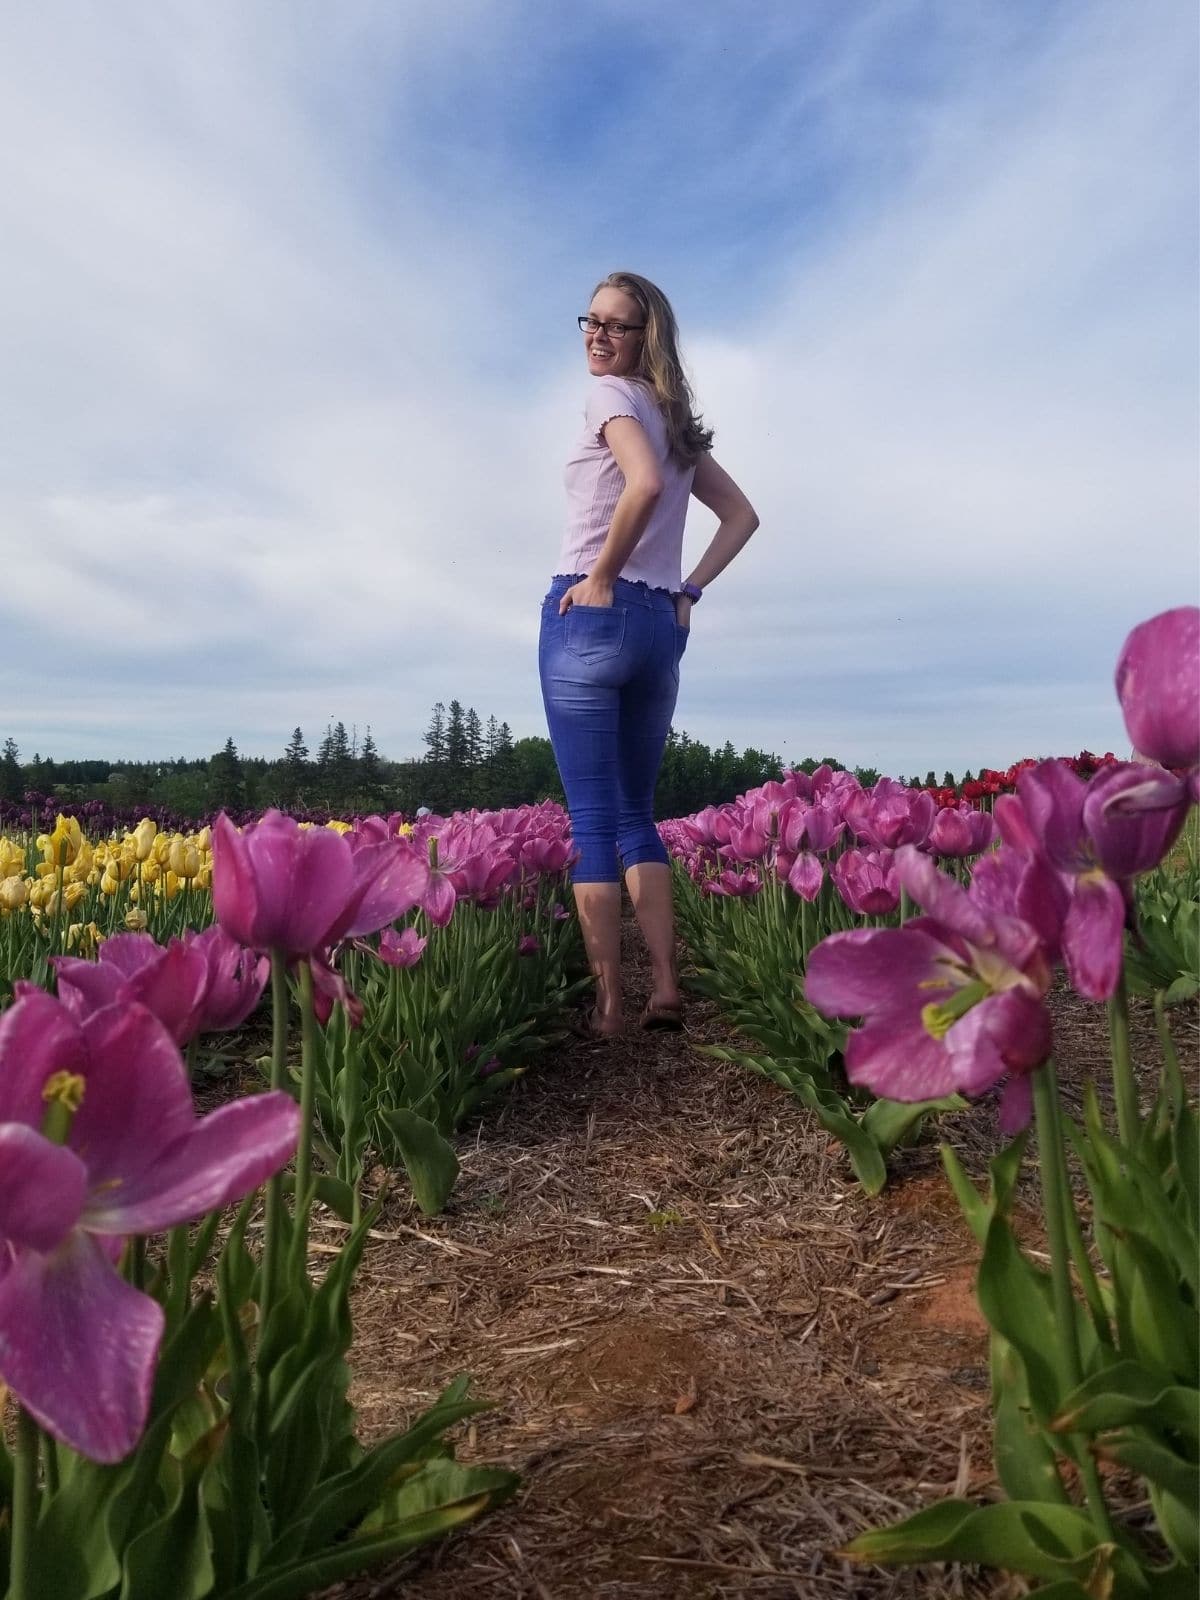 A blond girl is standing in a tulip field smiling at the camera. She is wearing a purple top and blue cropped jeans.